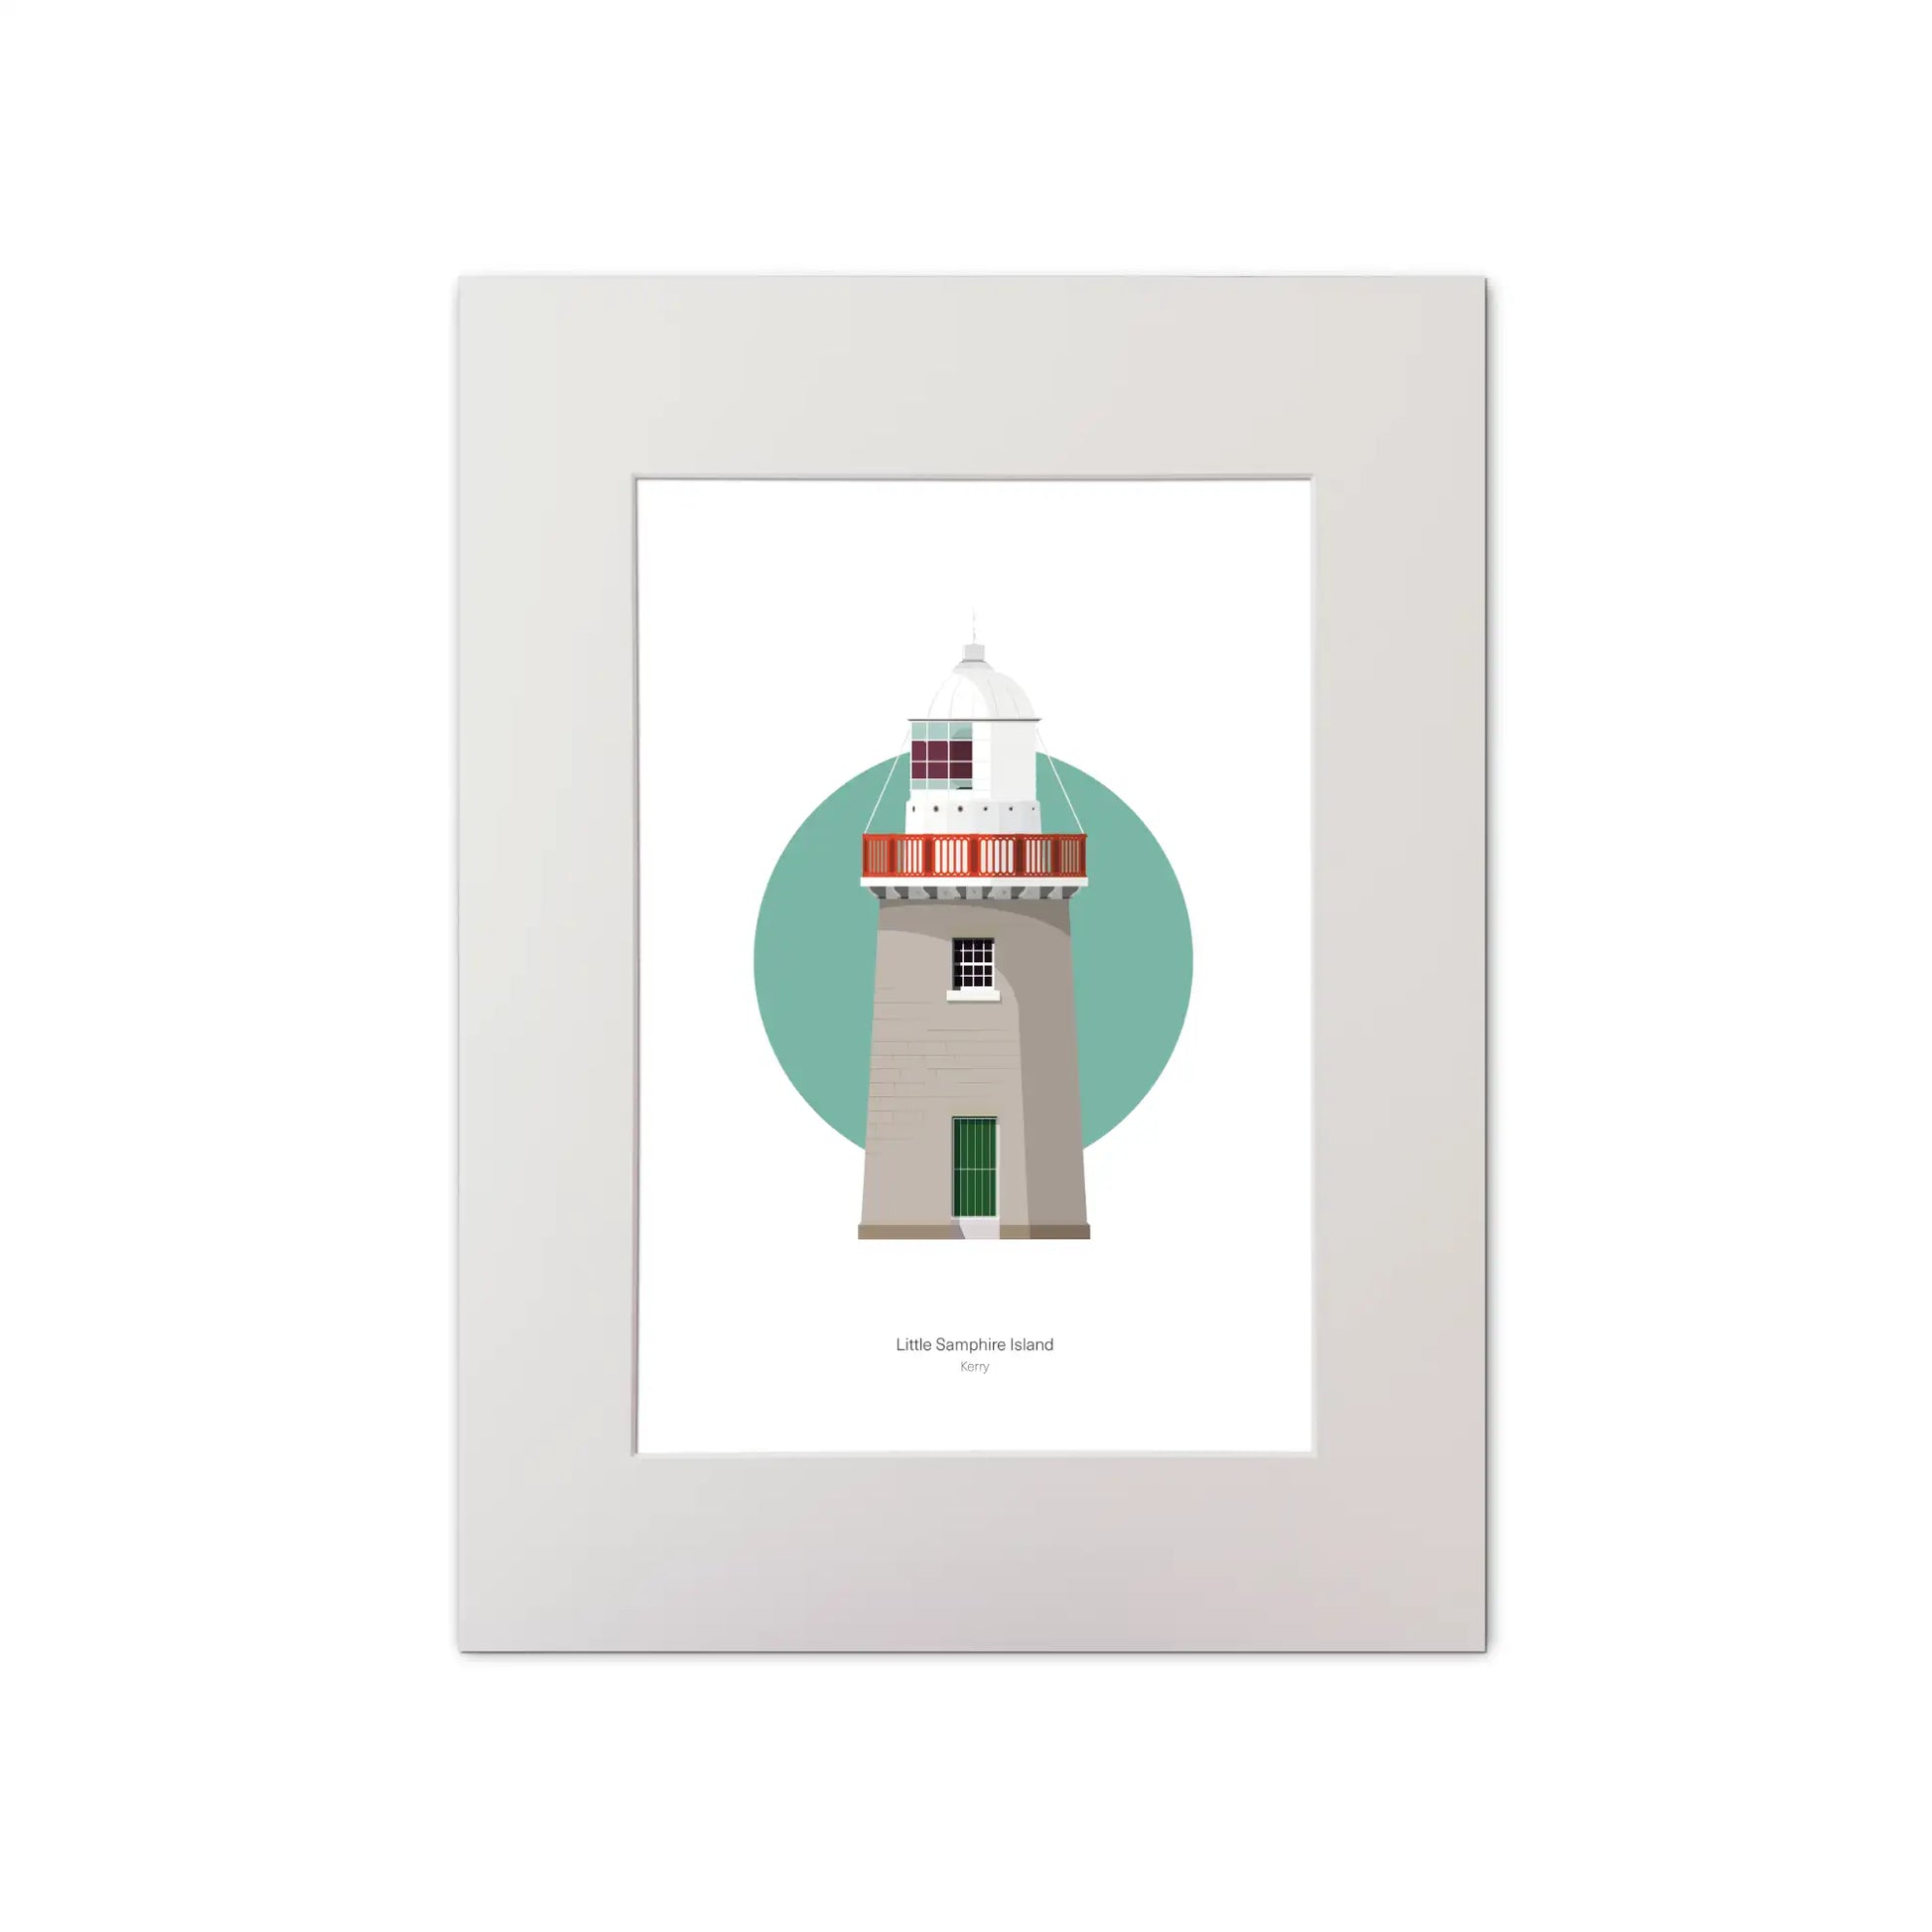 Contemporary graphic illustration of Little Samphire Island lighthouse on a white background inside light blue square, mounted and measuring 30x40cm.